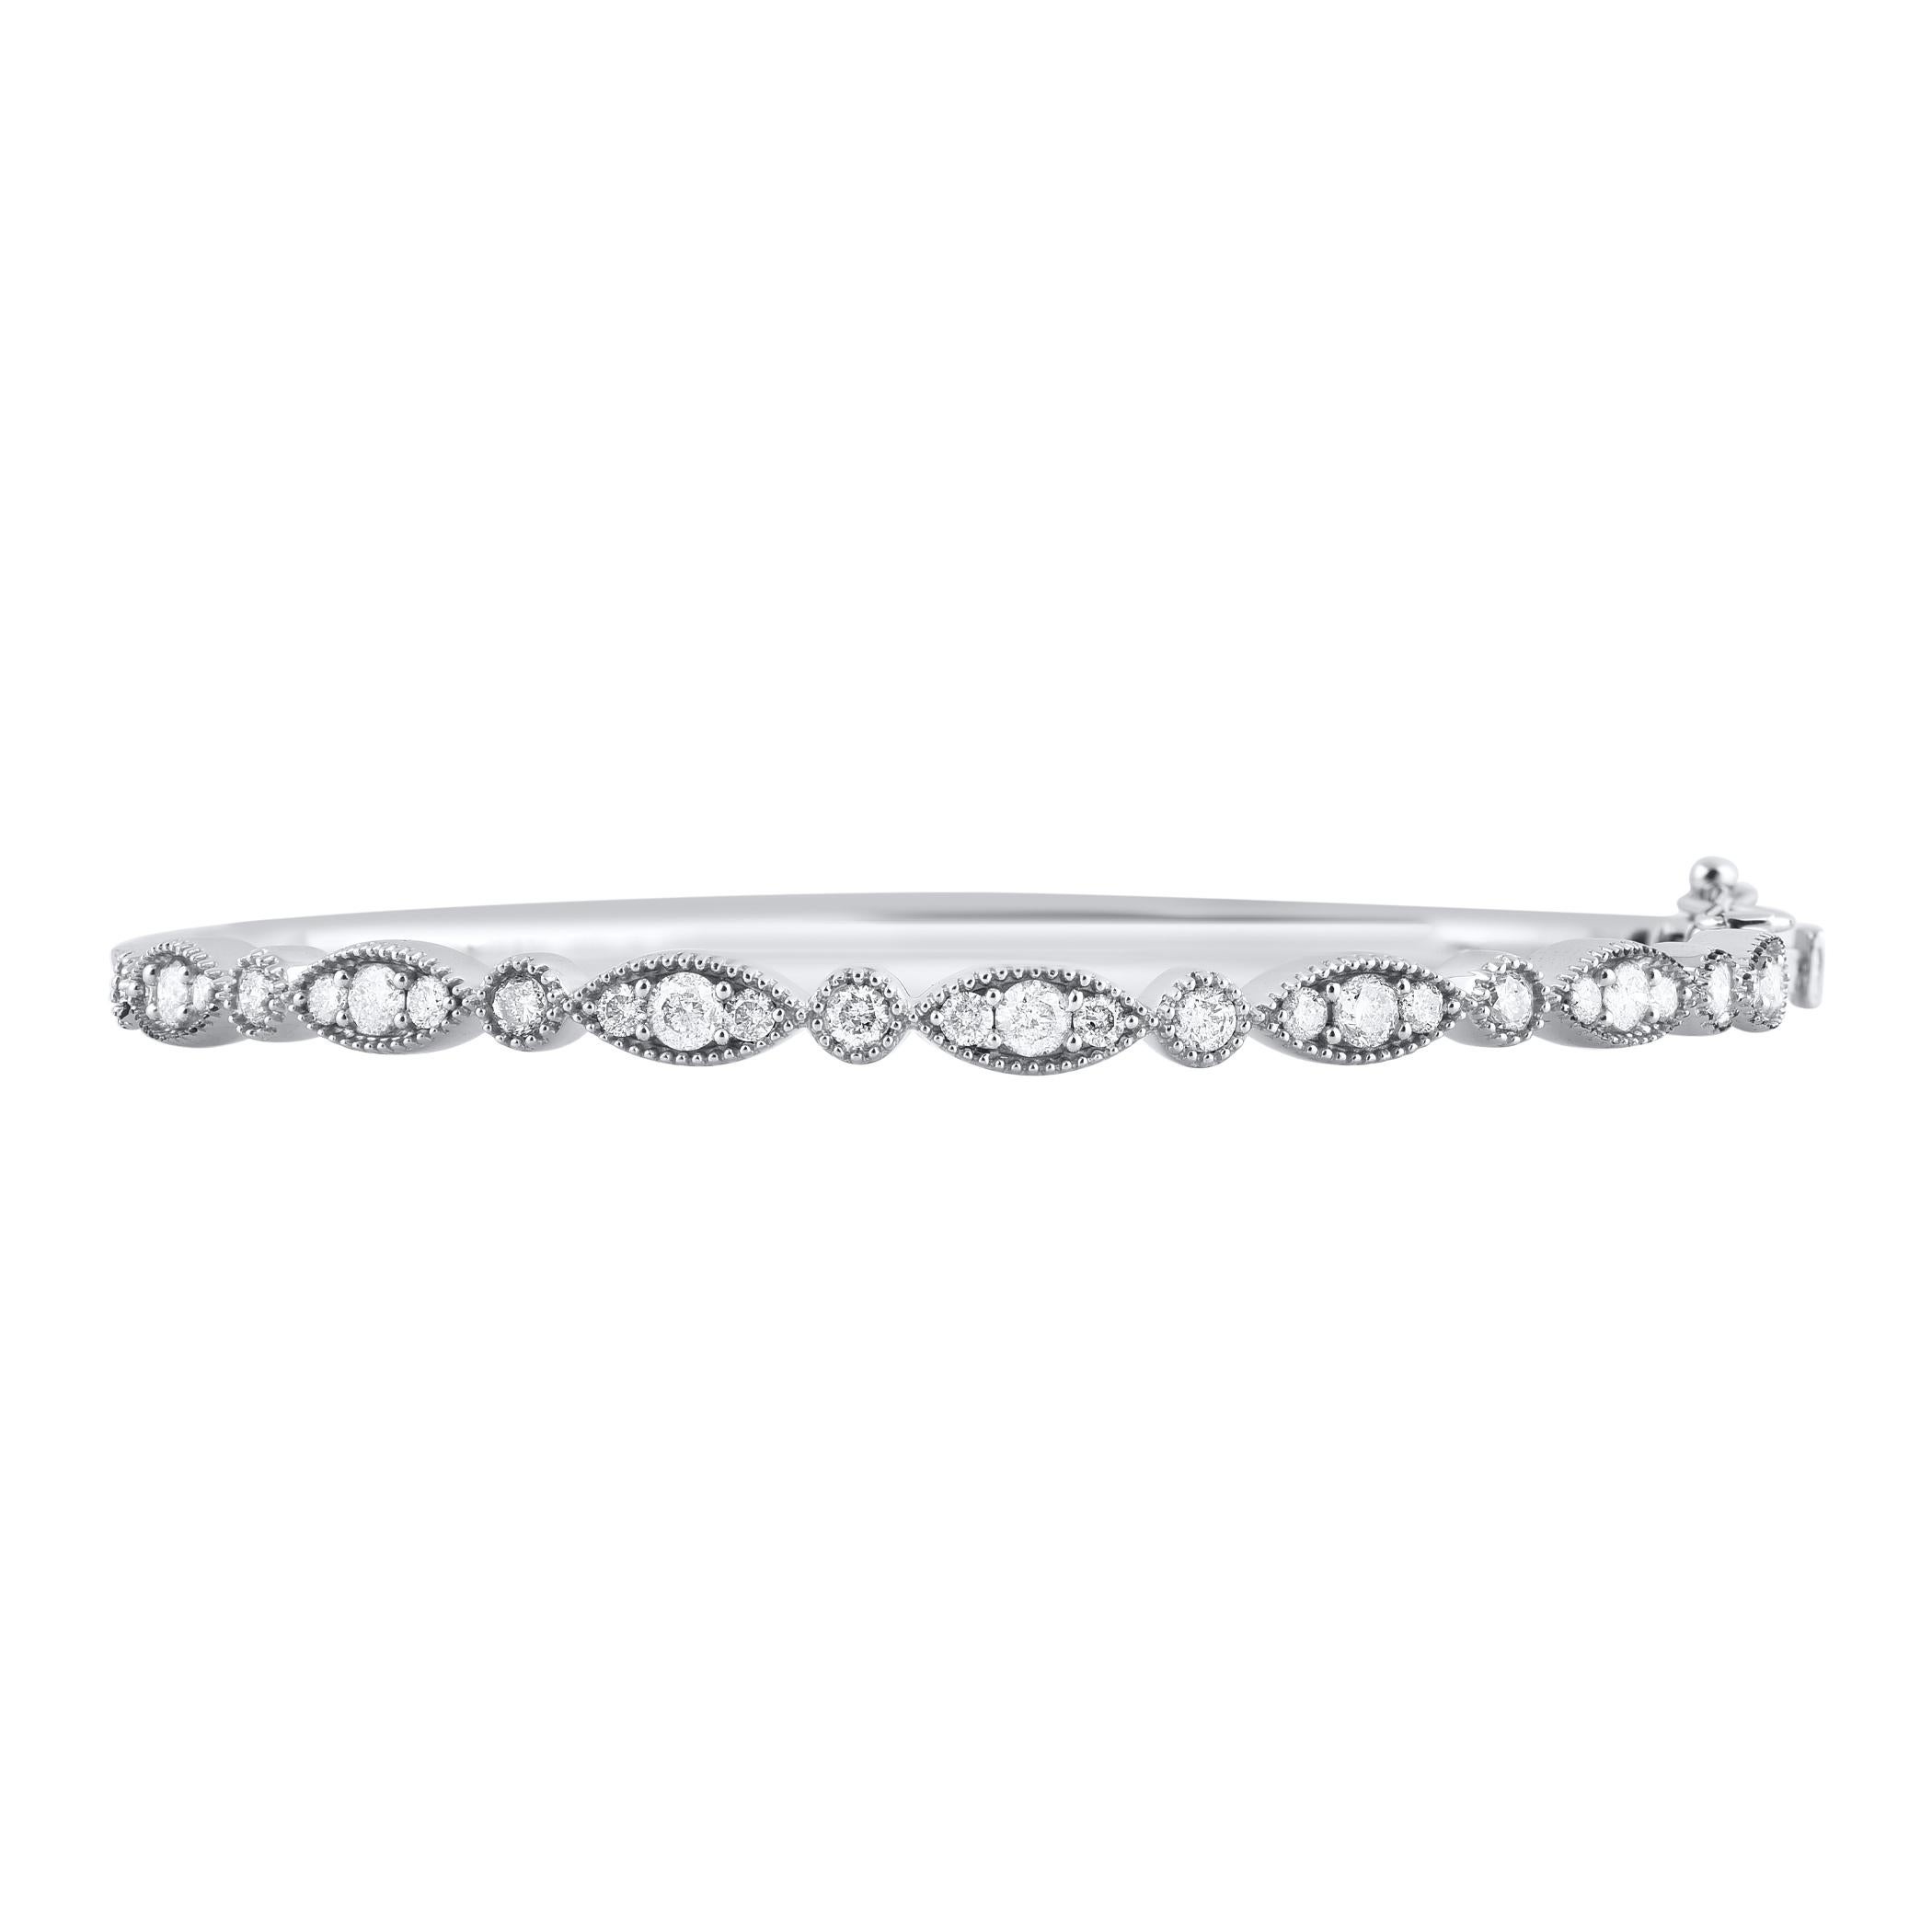 Enhance your everyday look with this diamond bangle bracelet. This Shimmering bangle bracelet features 29 natural round brilliant cut diamonds in prong and bezel setting and crafted in 18kt white gold. Diamonds are graded H-I color, I2 clarity. 
